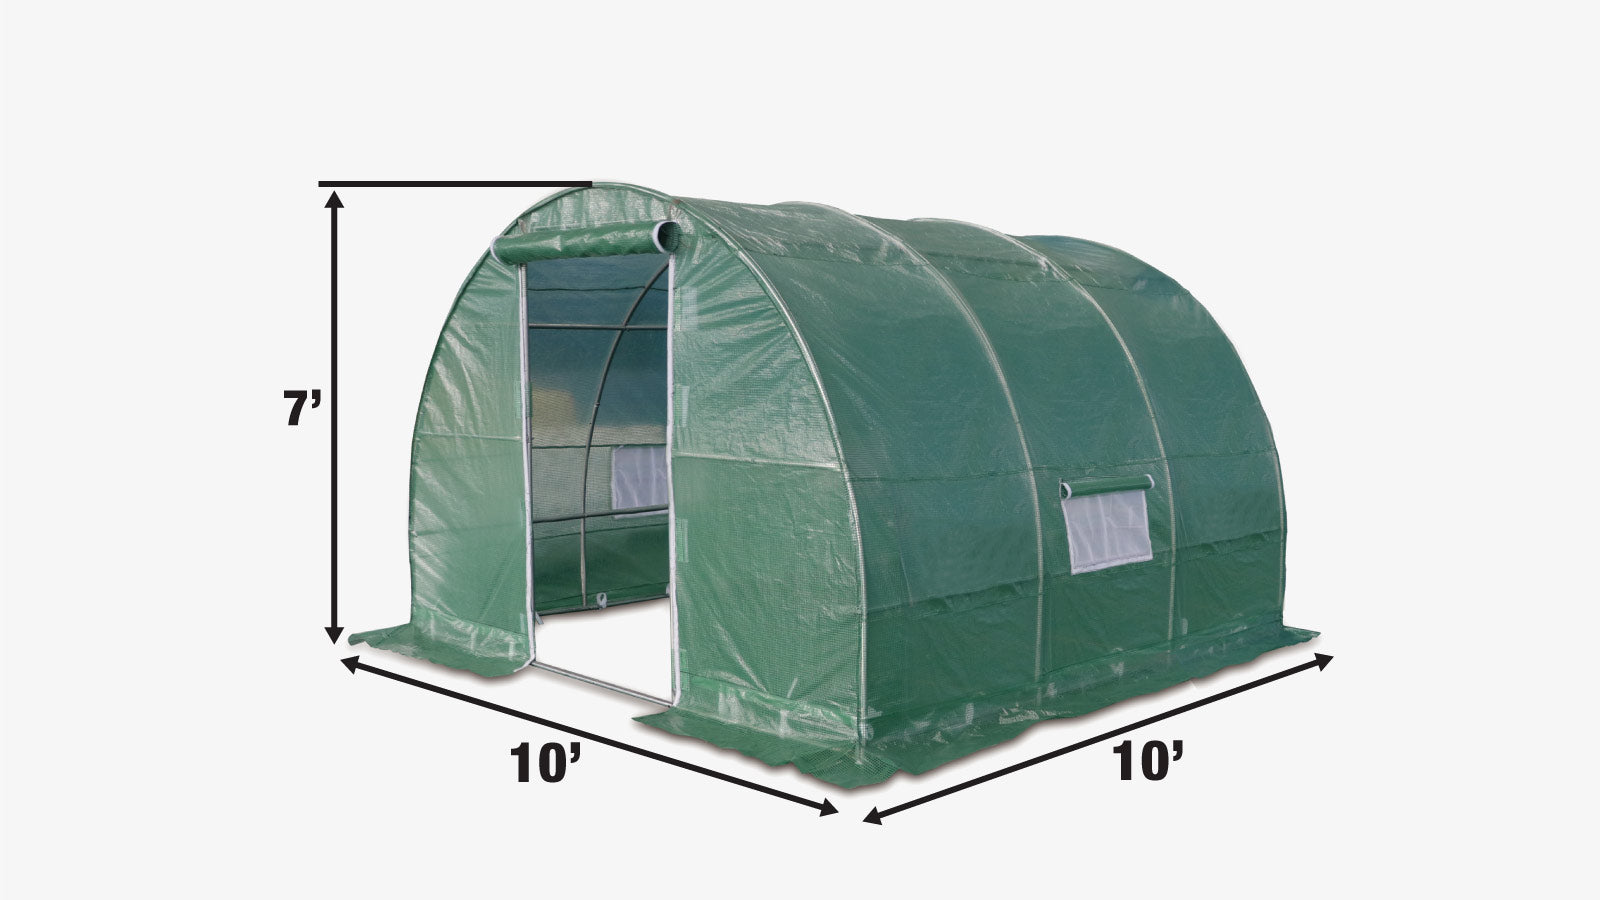 TMG Industrial 10' x 10' Tunnel Greenhouse Grow Tent w/Ripstop Leno Cover, Cold Frame, Roll-Up Mesh Windows, Round Top Roof, TMG-GH1010R-specifications-image